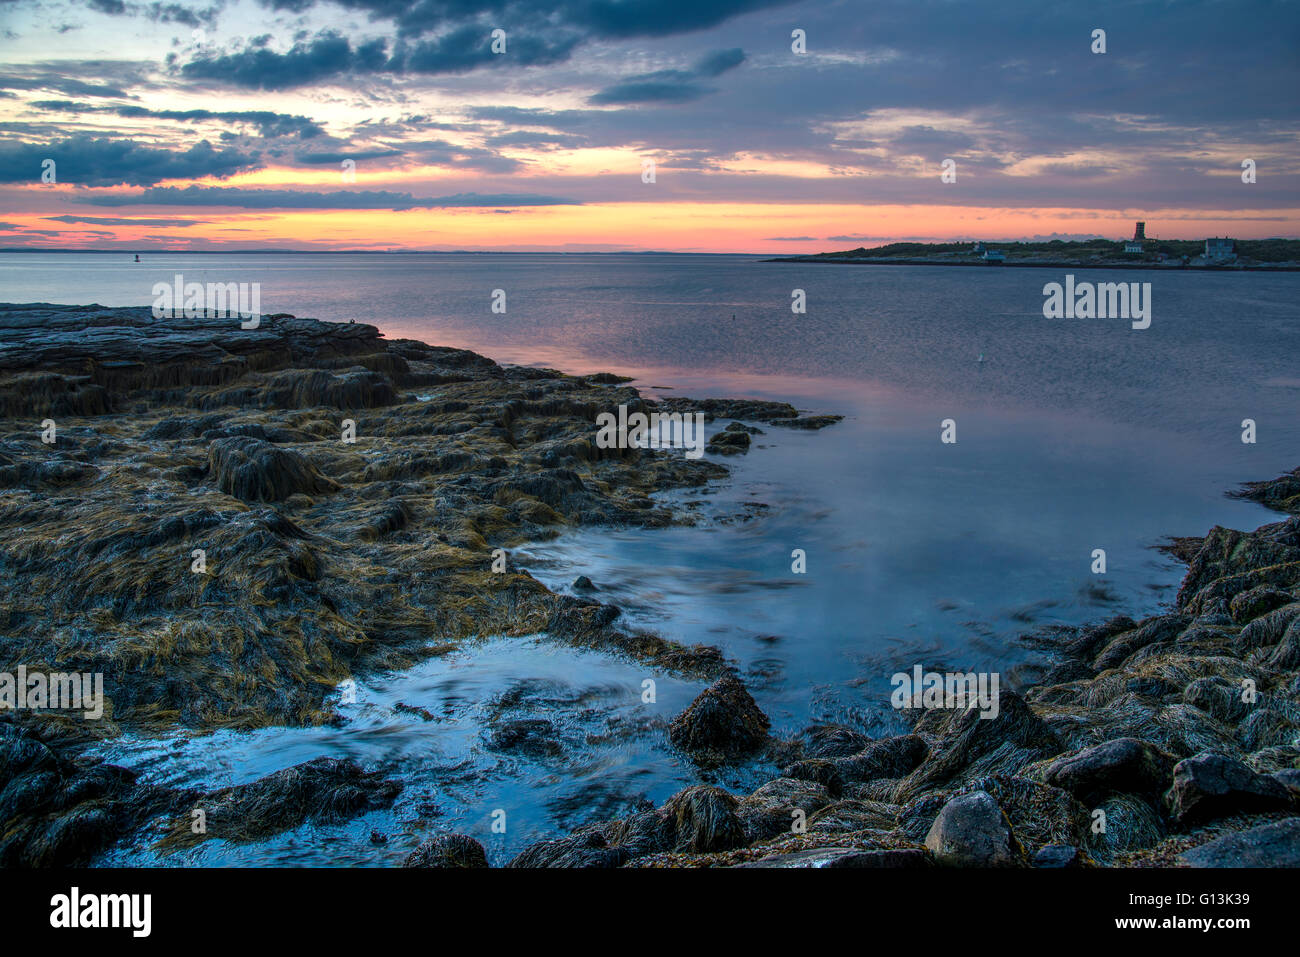 Image of the sunset from Star Island, New Hampshire, USA with a view of Isle of Shoals/ Cedar Island Stock Photo